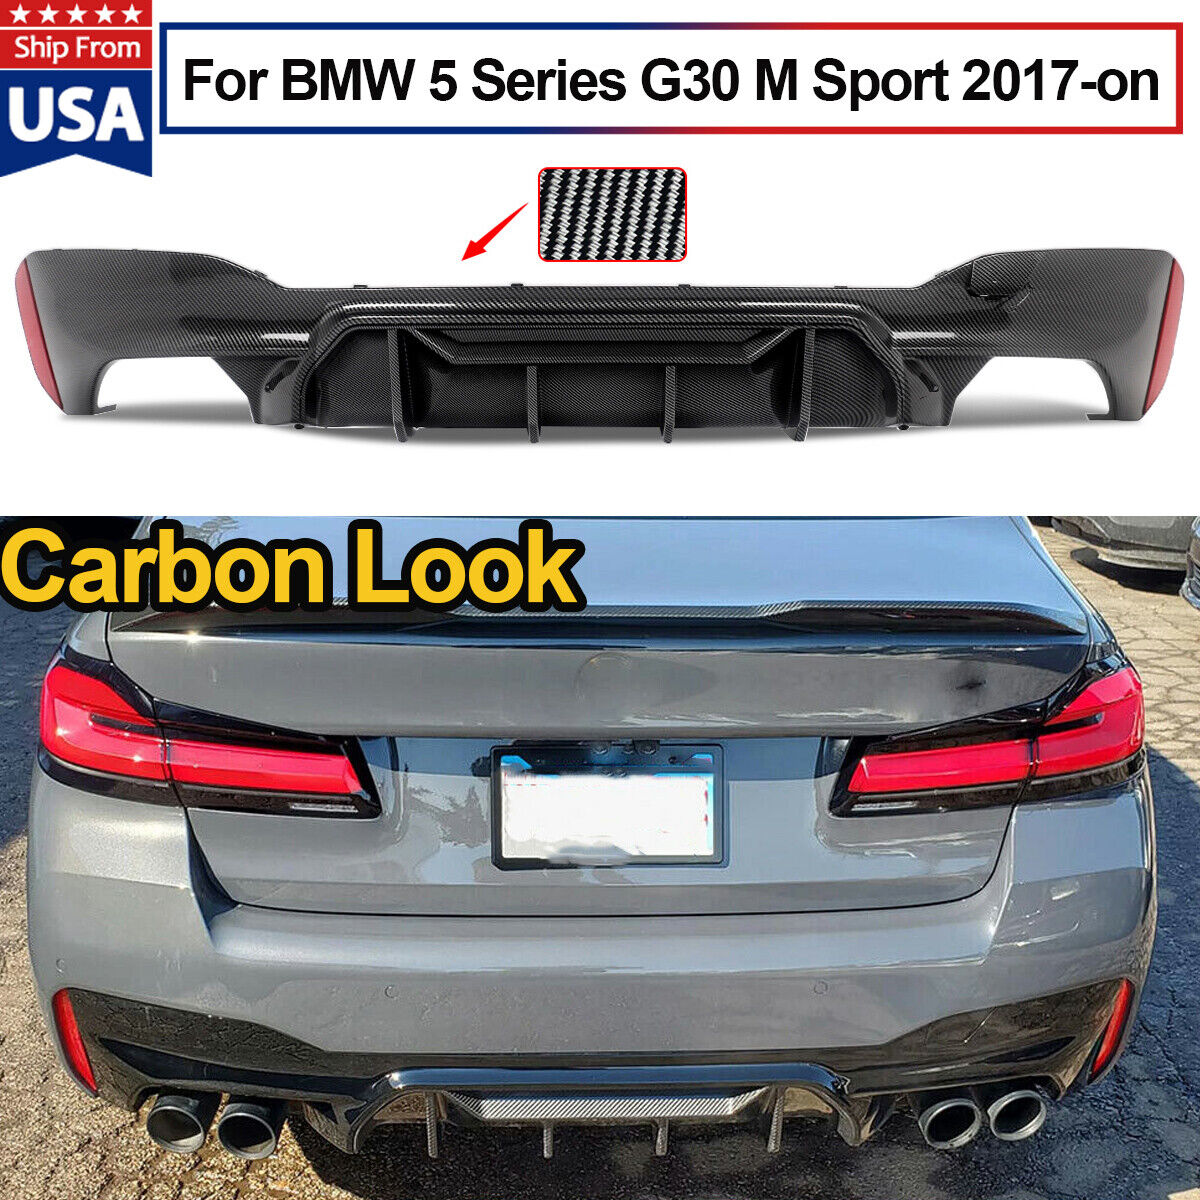 M5 Competition Style Rear Diffuser For 2017-21 BMW G30 F90 M5 540i Carbon Look